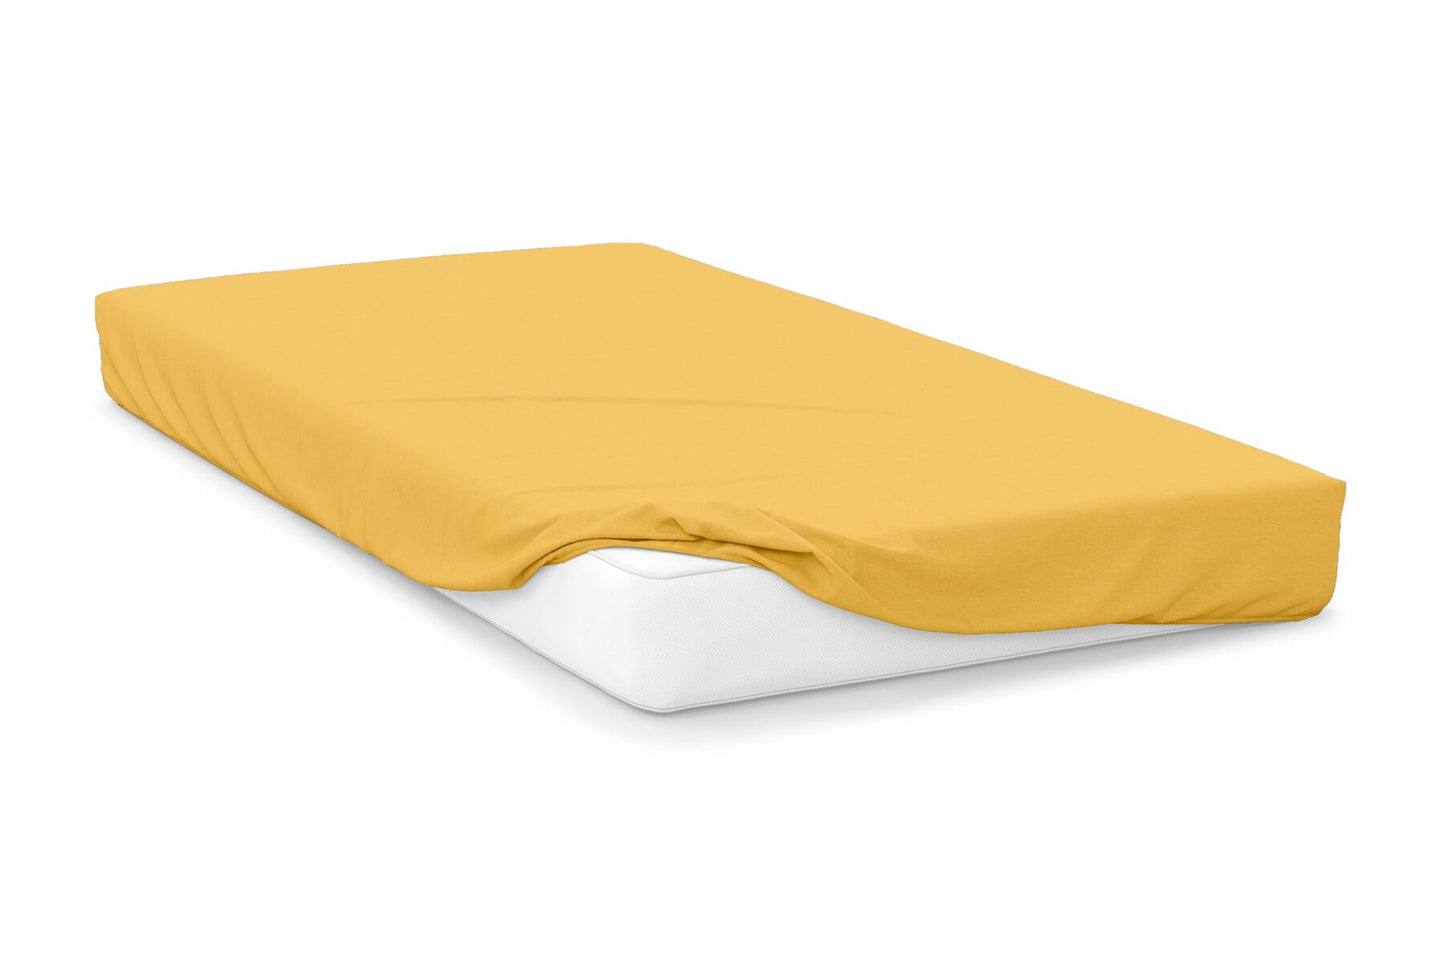 Belledorm-Fitted Sheets-Luxury Percale-200 Thread Count-Saffron